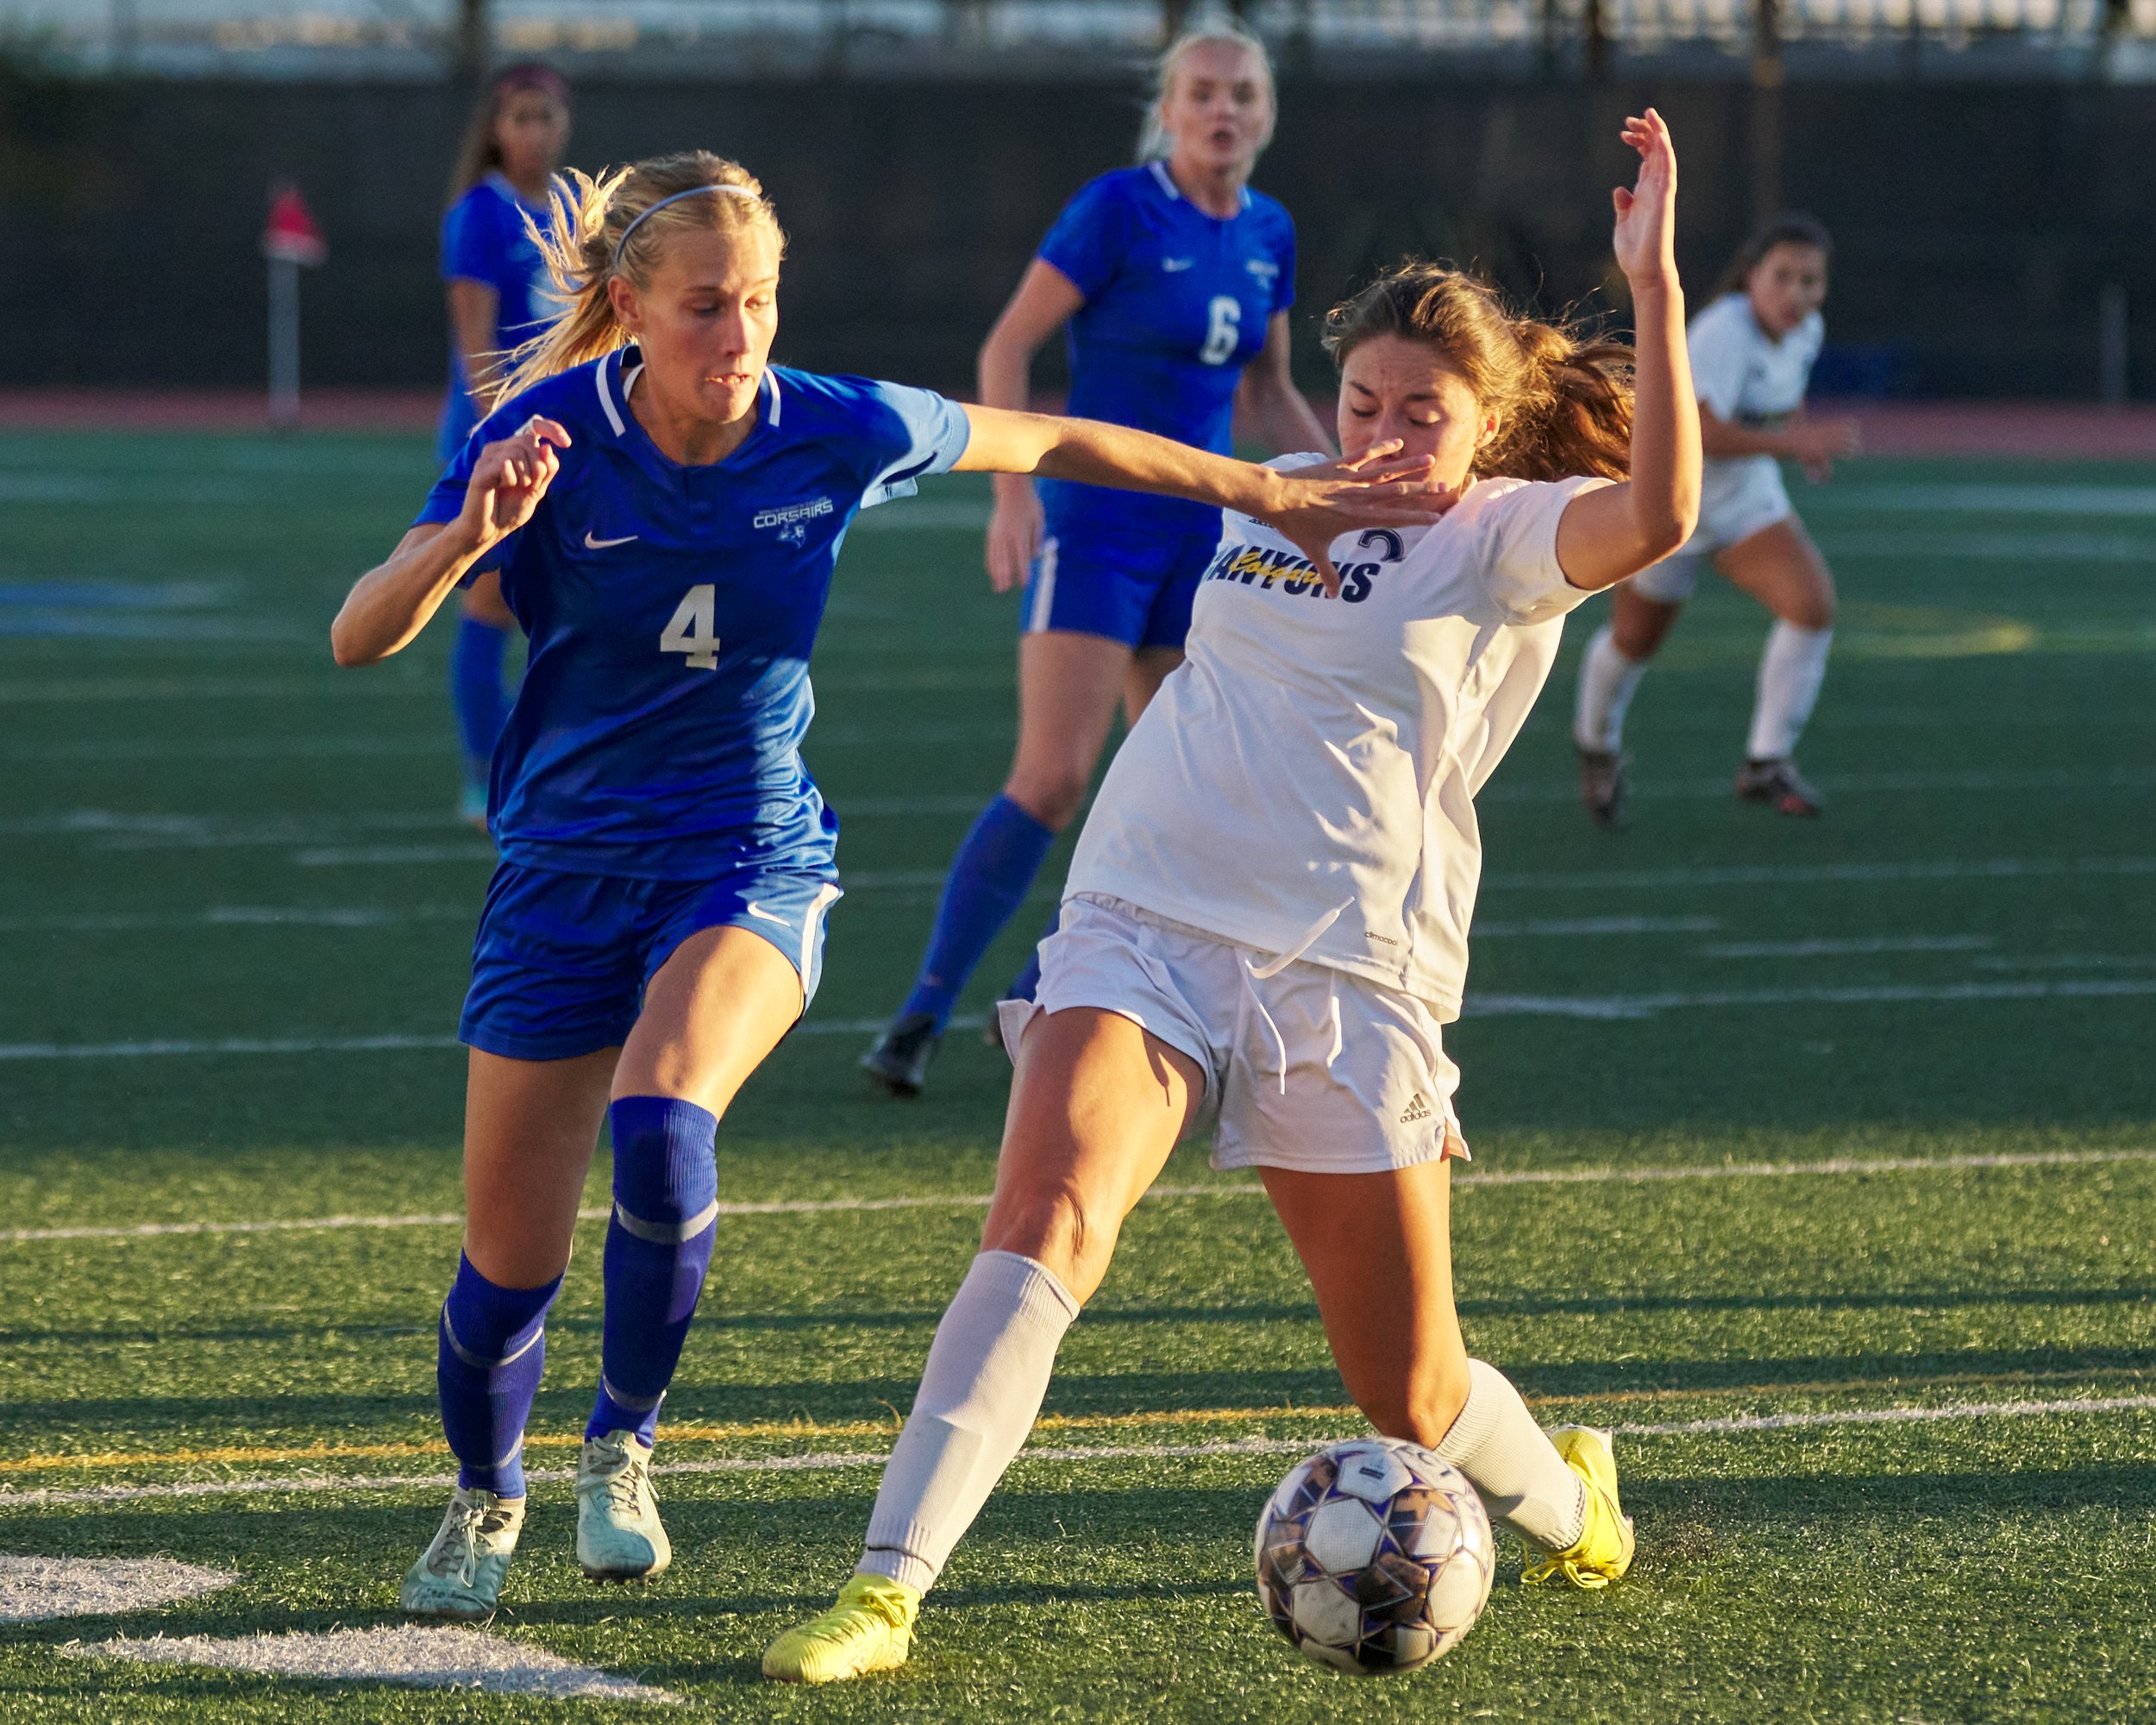  College of the Canyons Cougars' Laurel Durkin attempts to steal the ball from Santa Monica College Corsairs' Emma Rierstam during the women's soccer match on Thursday, Nov. 10, 2022, at Corsair Field in Santa Monica, Calif. The Corsairs lost 3-0. (N